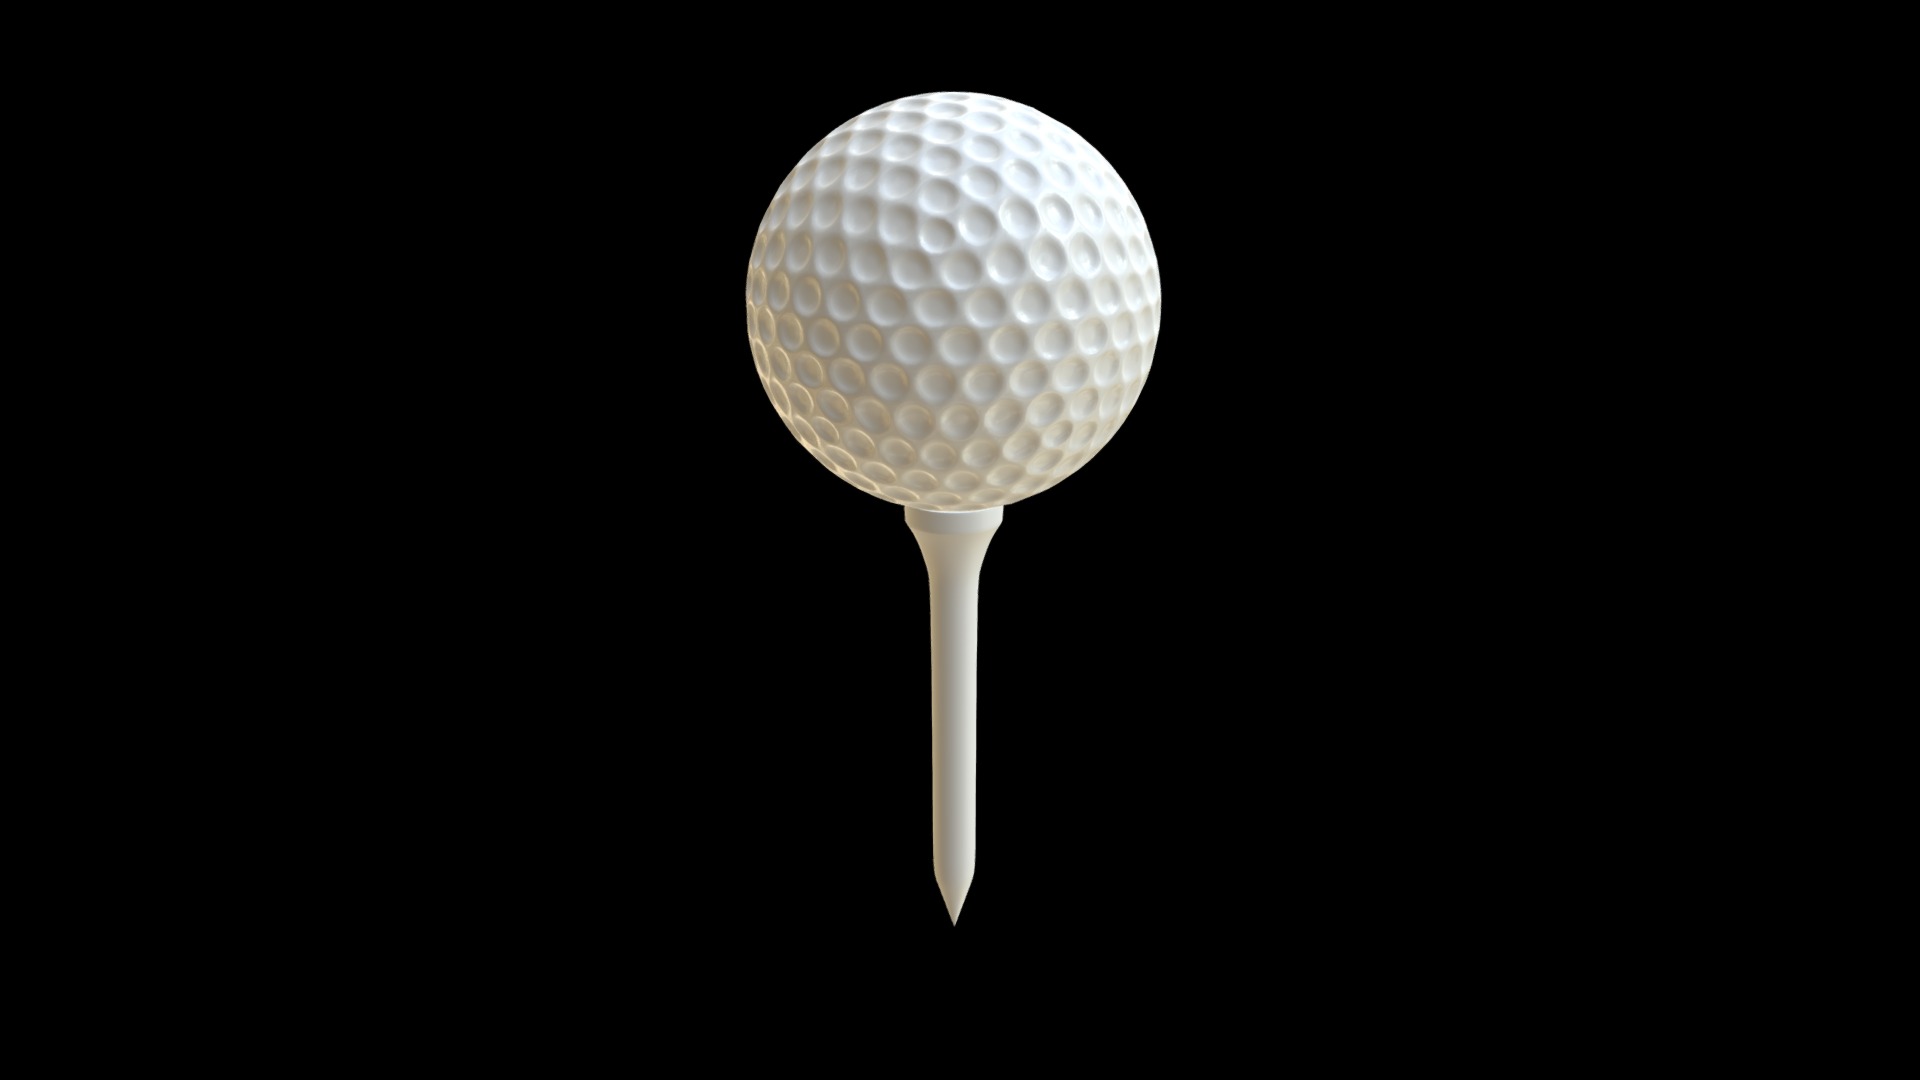 3D model Golf ball and Tee set - This is a 3D model of the Golf ball and Tee set. The 3D model is about a white and black mushroom.